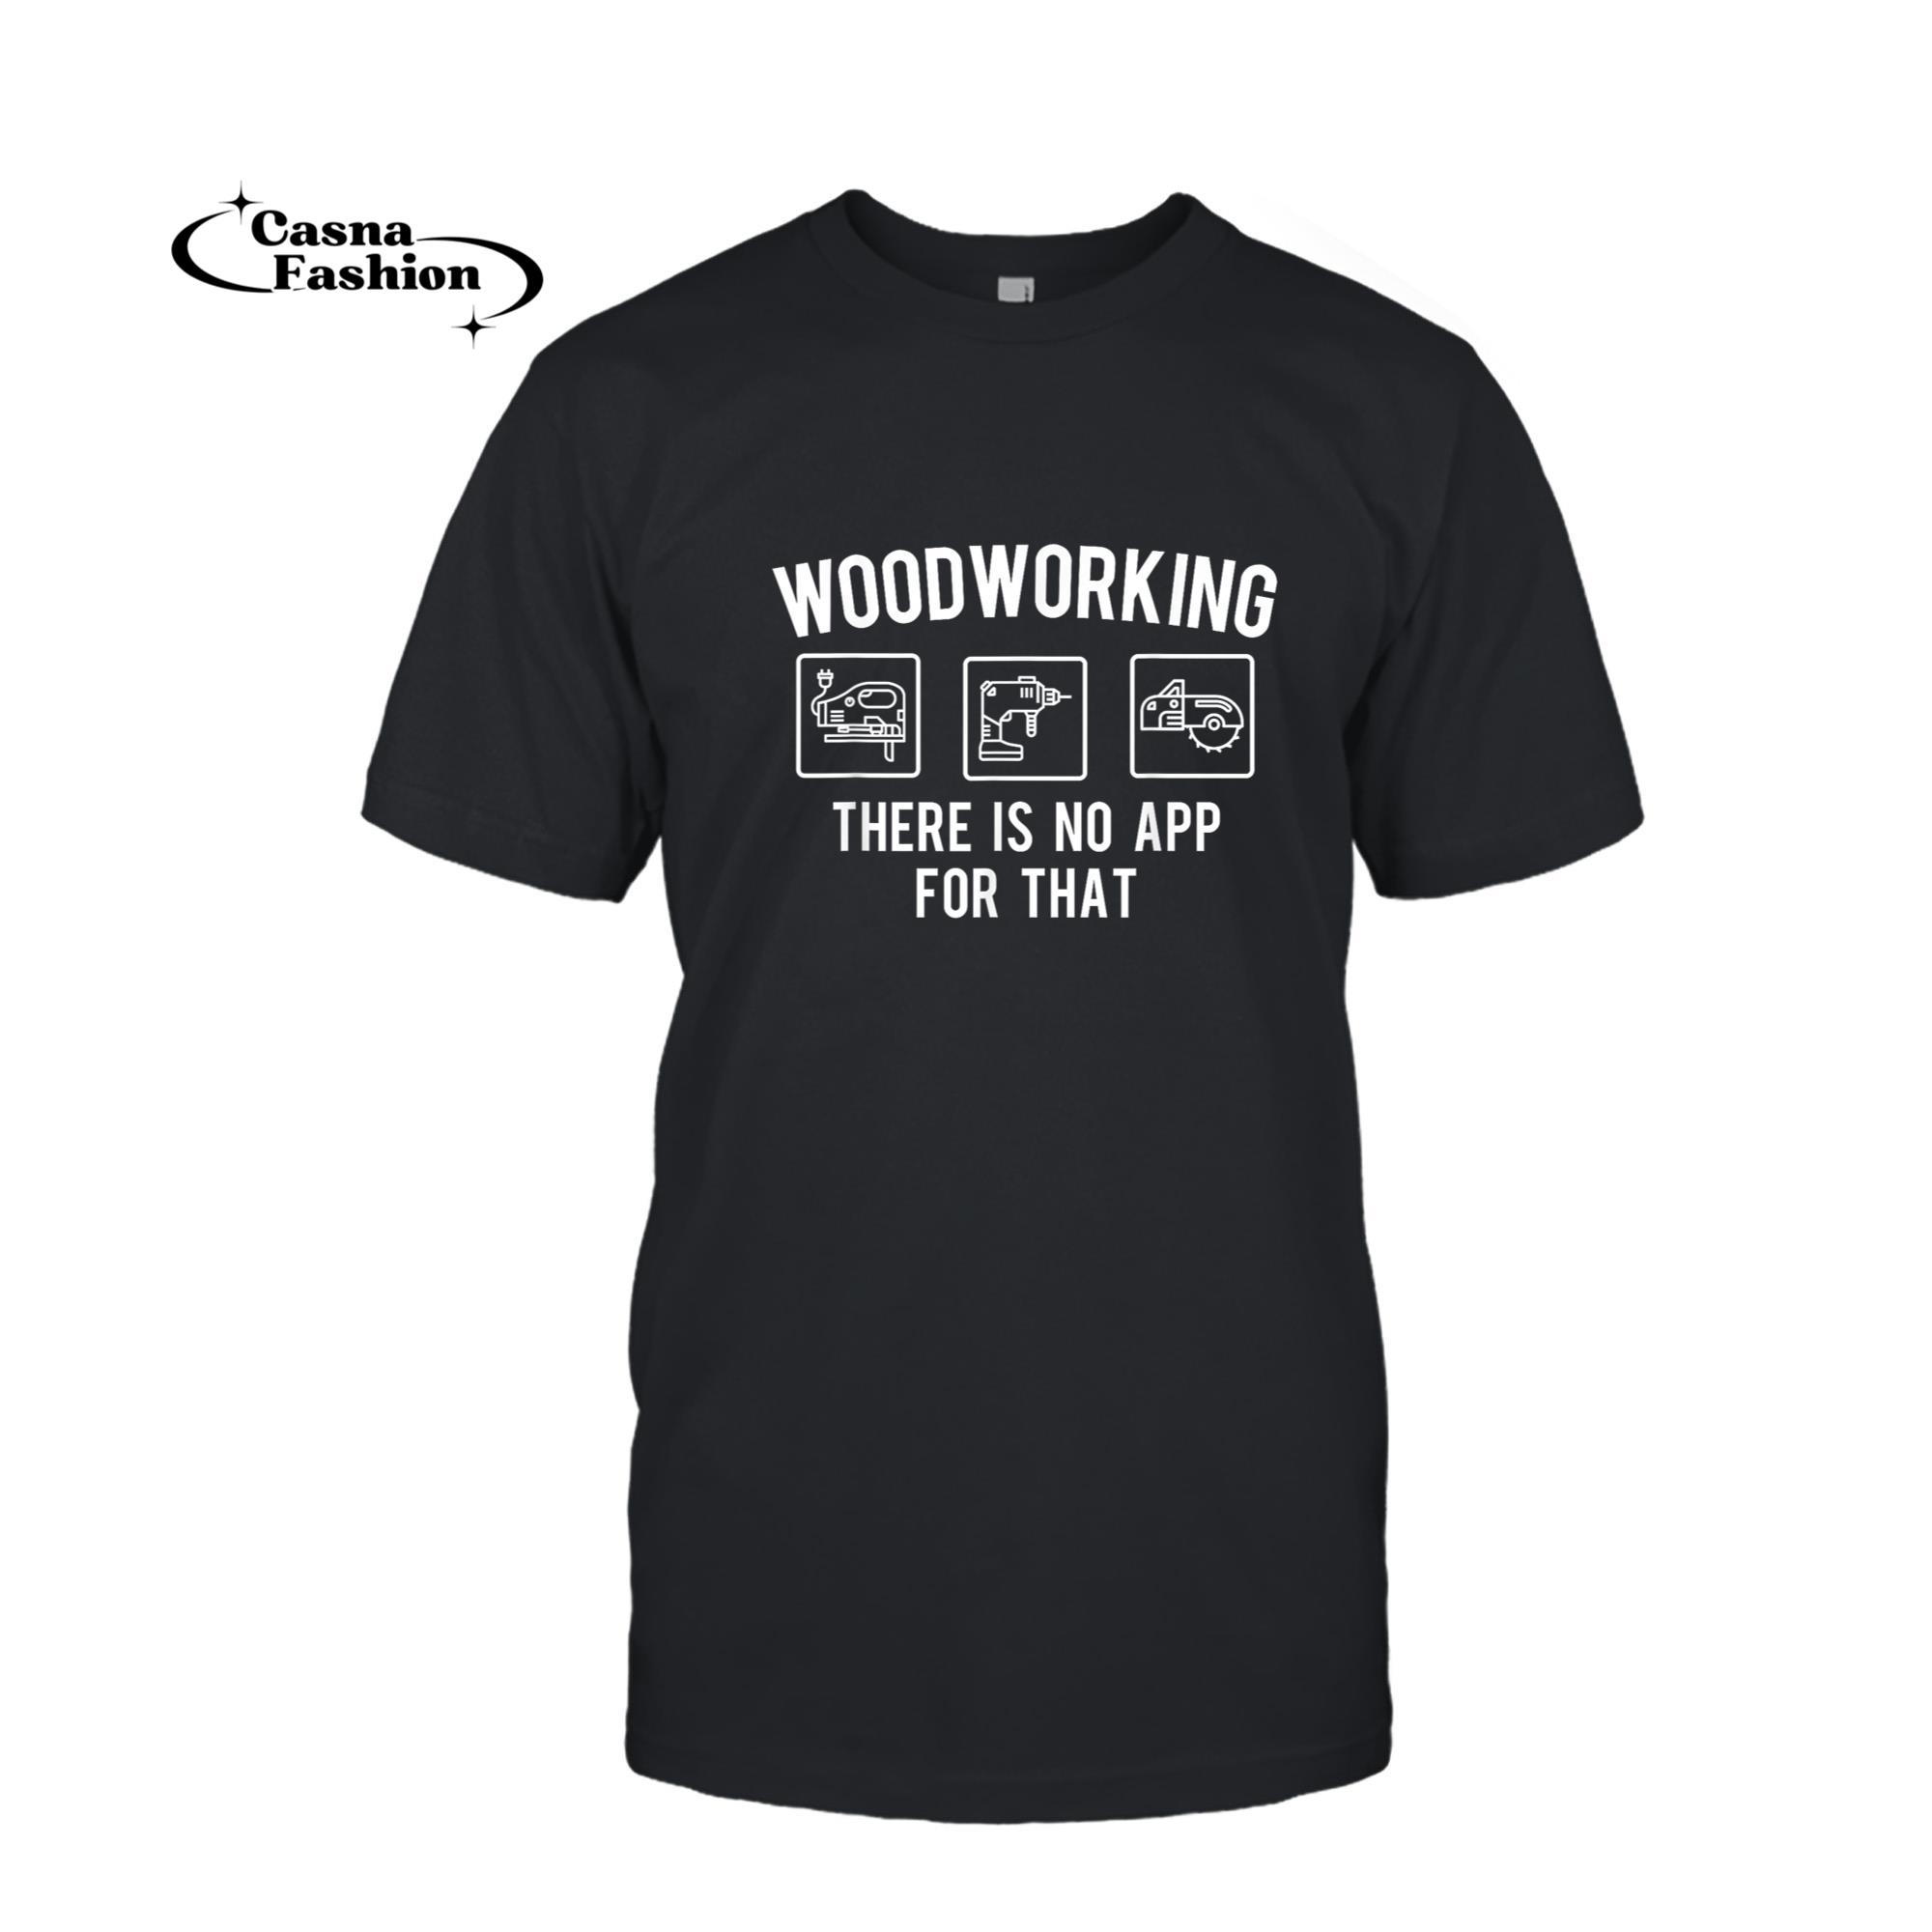 casnafashion_T-shirt_Woodworking There Is No App For That - Woodworker Carpenter T-Shirt_T-shirt_Black